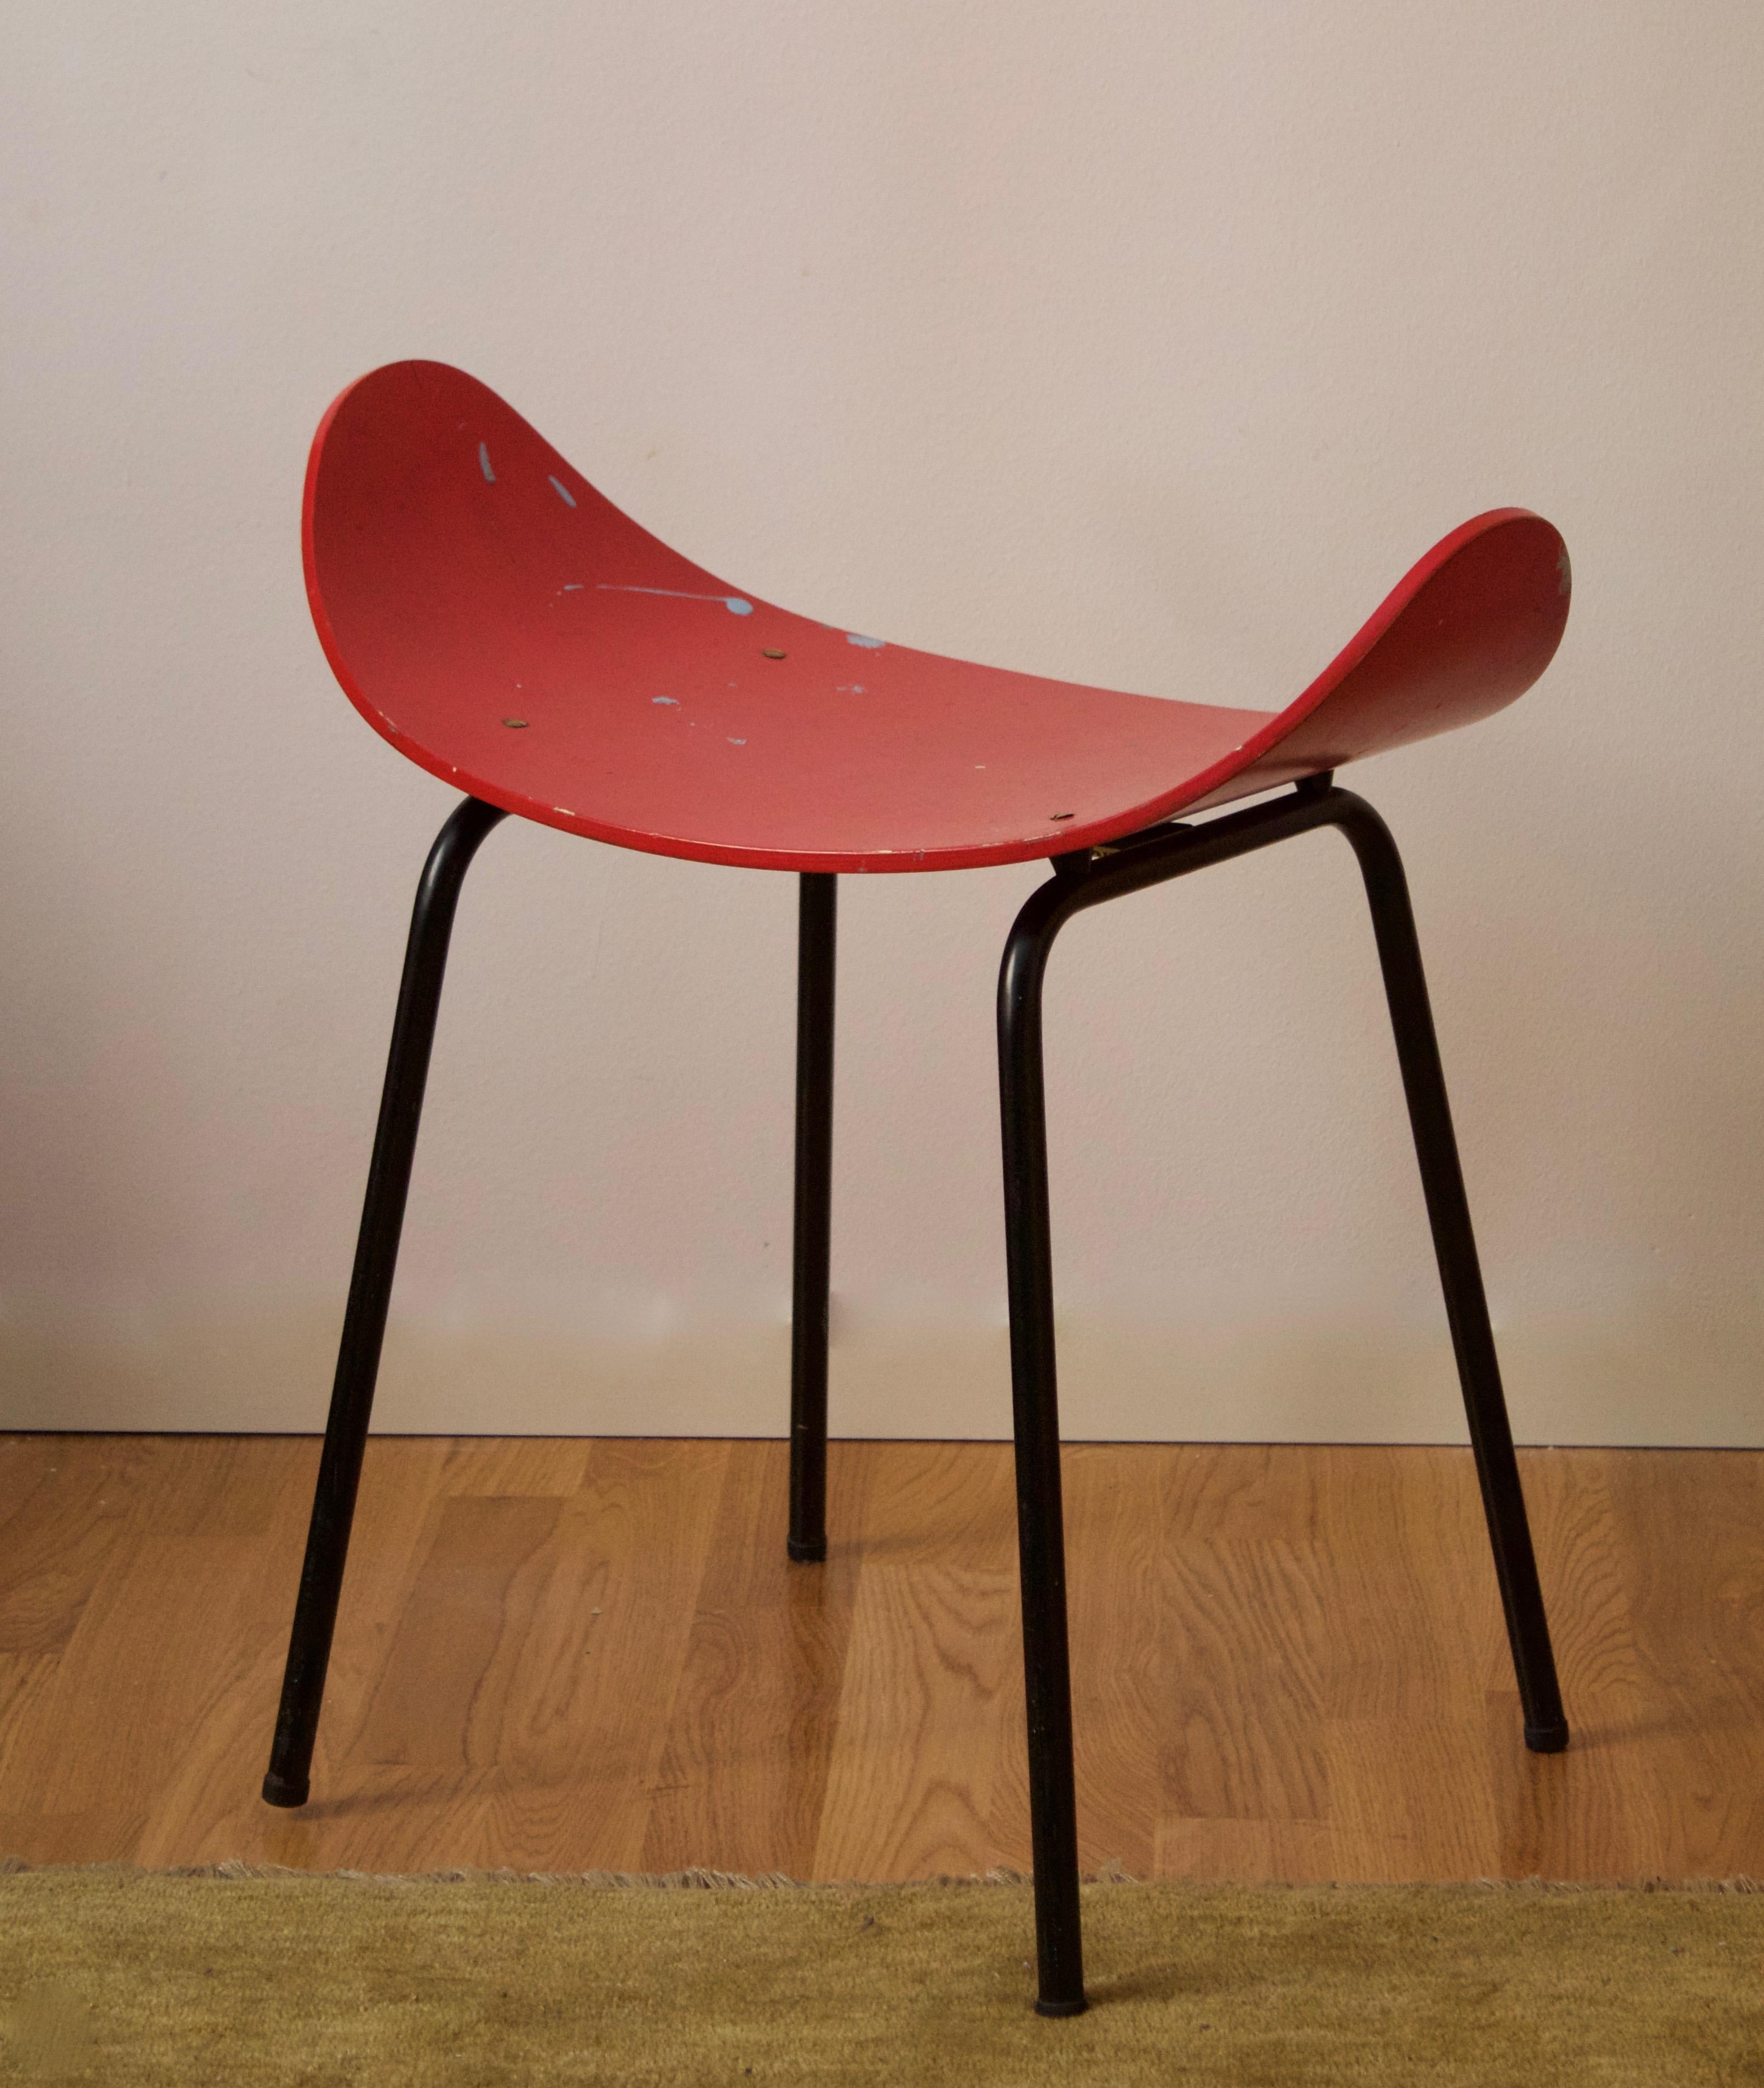 A rare stool, designed by Olof Kettunen, for J. Merivaara Oy, Finland 1950s. 

In plywood and original lacquered metal.

Other designers of the period include Paavo Tynell, Alvar Aalto, Charlotte Perriand, Jean Prouvé, and Isamu Noguchi.